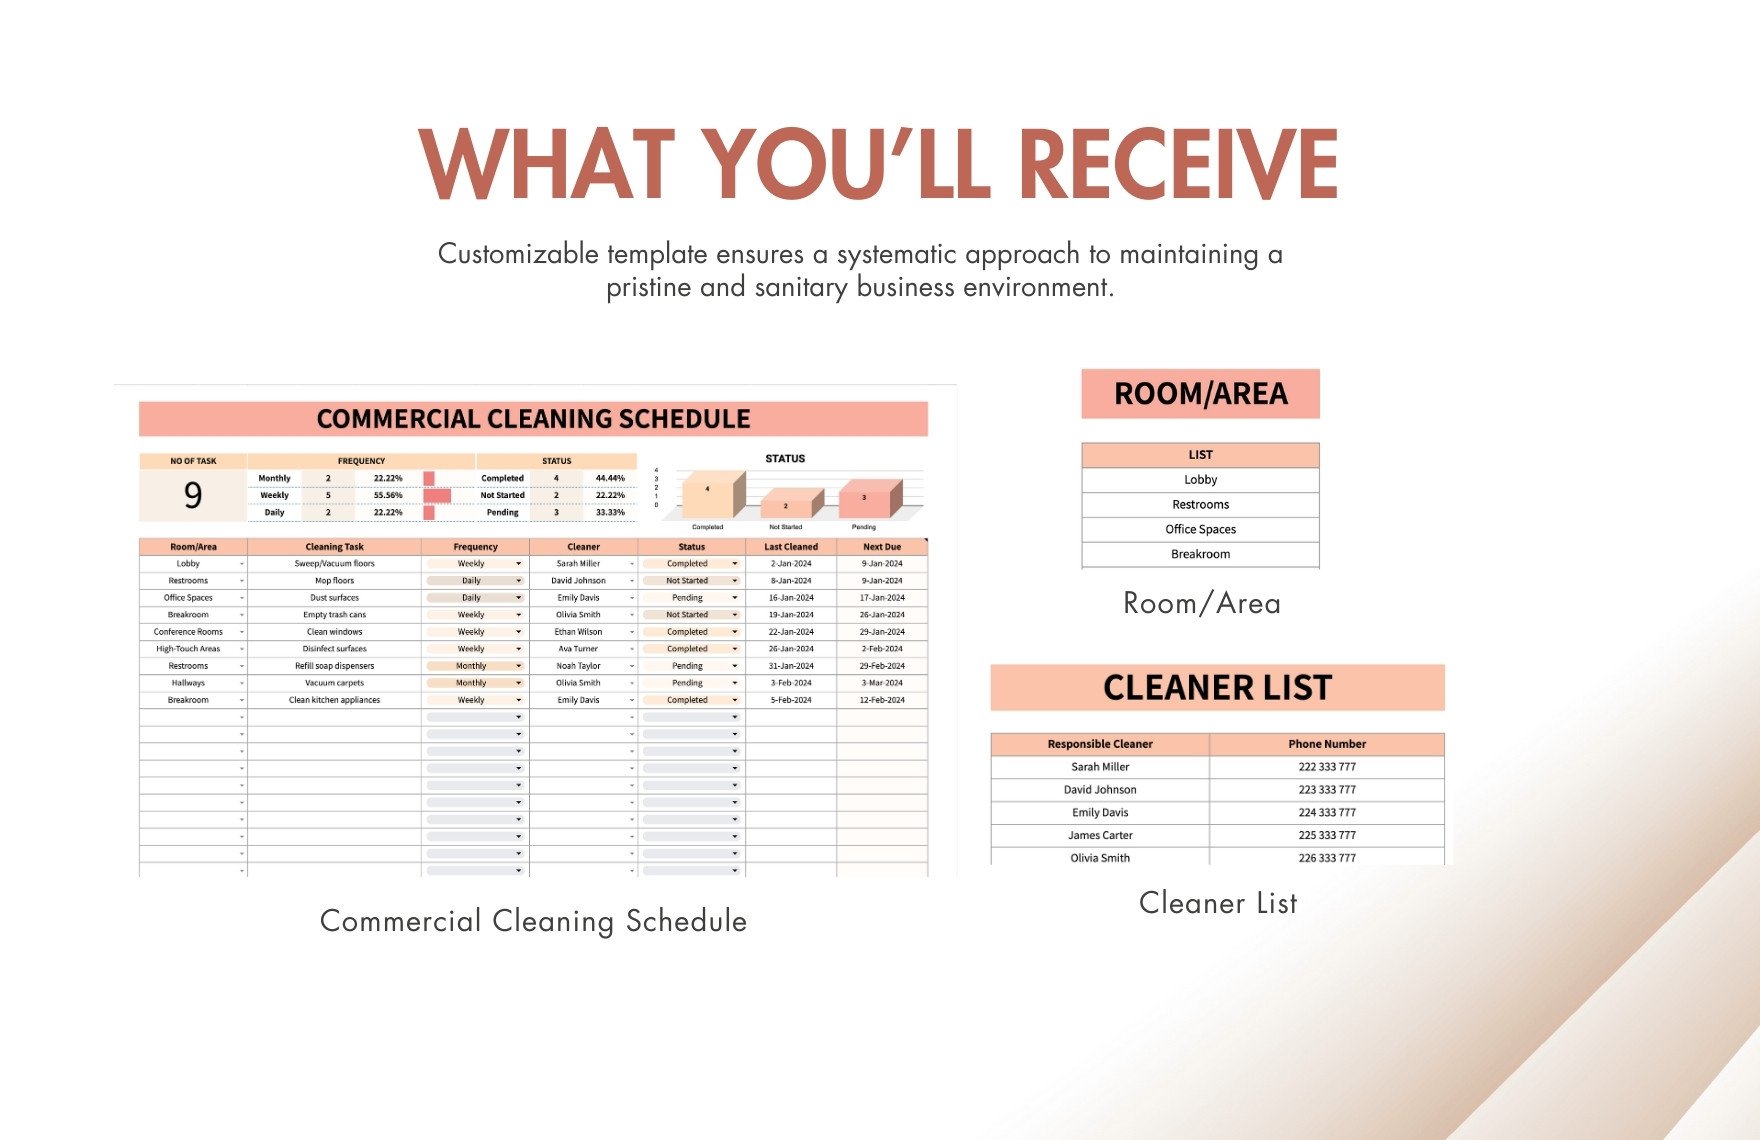 Commercial Cleaning Schedule Template